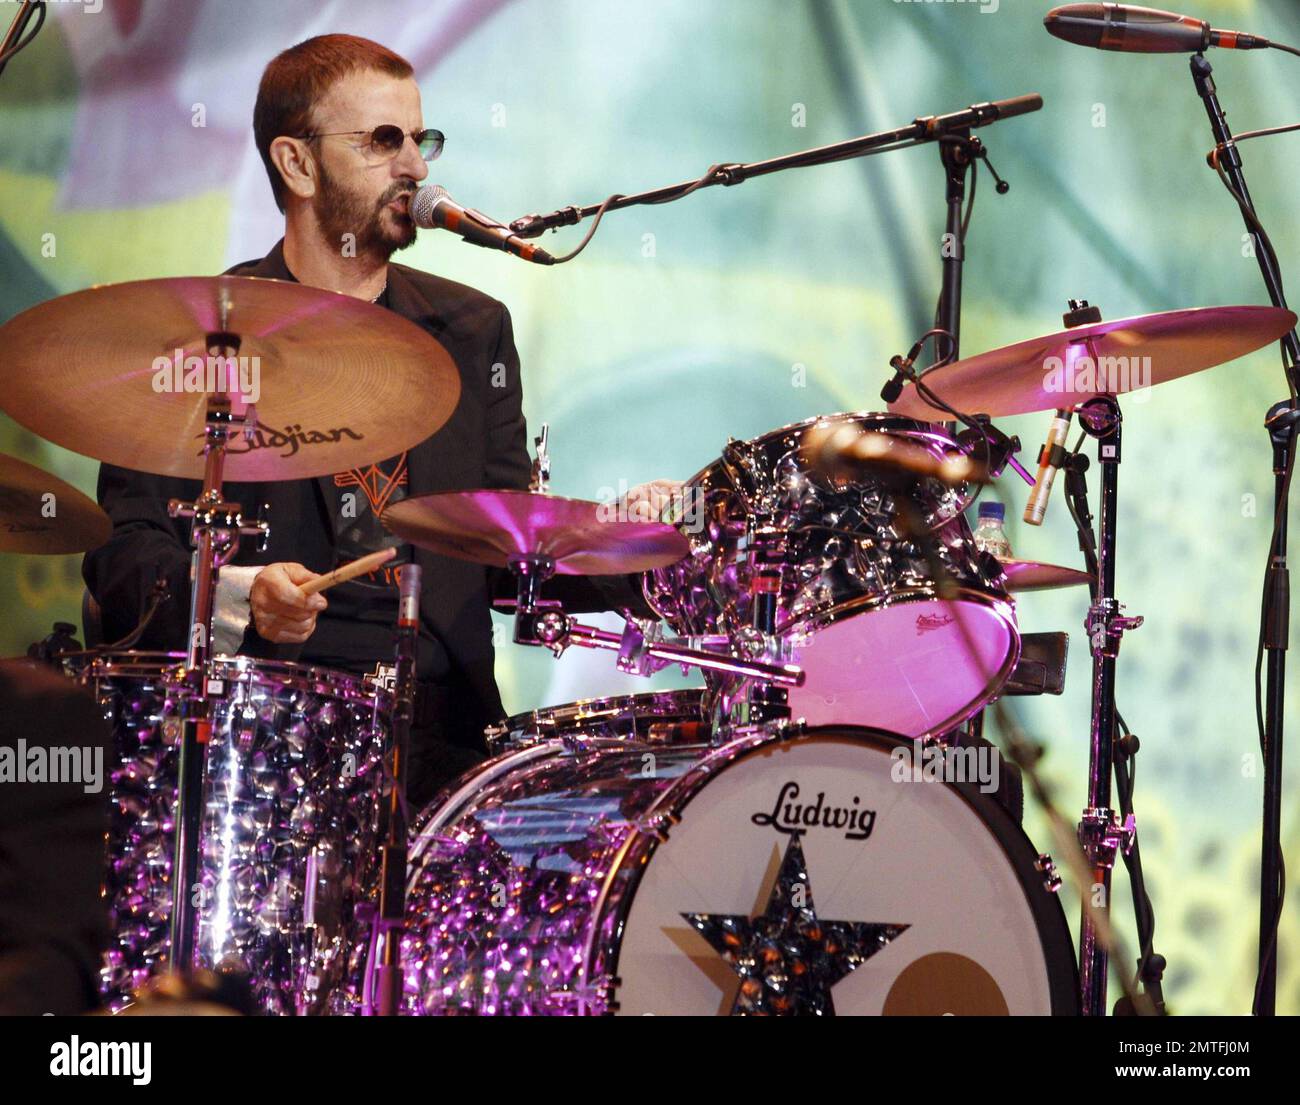 Former Beatle Ringo Starr (Richard Starkey) sings and plays the drums during a live performance with his All-Star Band at Hard Rock Live inside the Seminole Hard Rock Hotel & Casino. Before the show Ringo spoke to the Hard Rock staff and showed off some of his artwork.  After the show Ringo reportedly donated the drum kit he's been using during his All-Star Band tour to The Hard Rock Cafe, combining his charitable efforts with Hard Rock International, which donated $197,500 to Yele Haiti, a Haitian Relief fund. Hollywood, FL. 07/15/10. Stock Photo